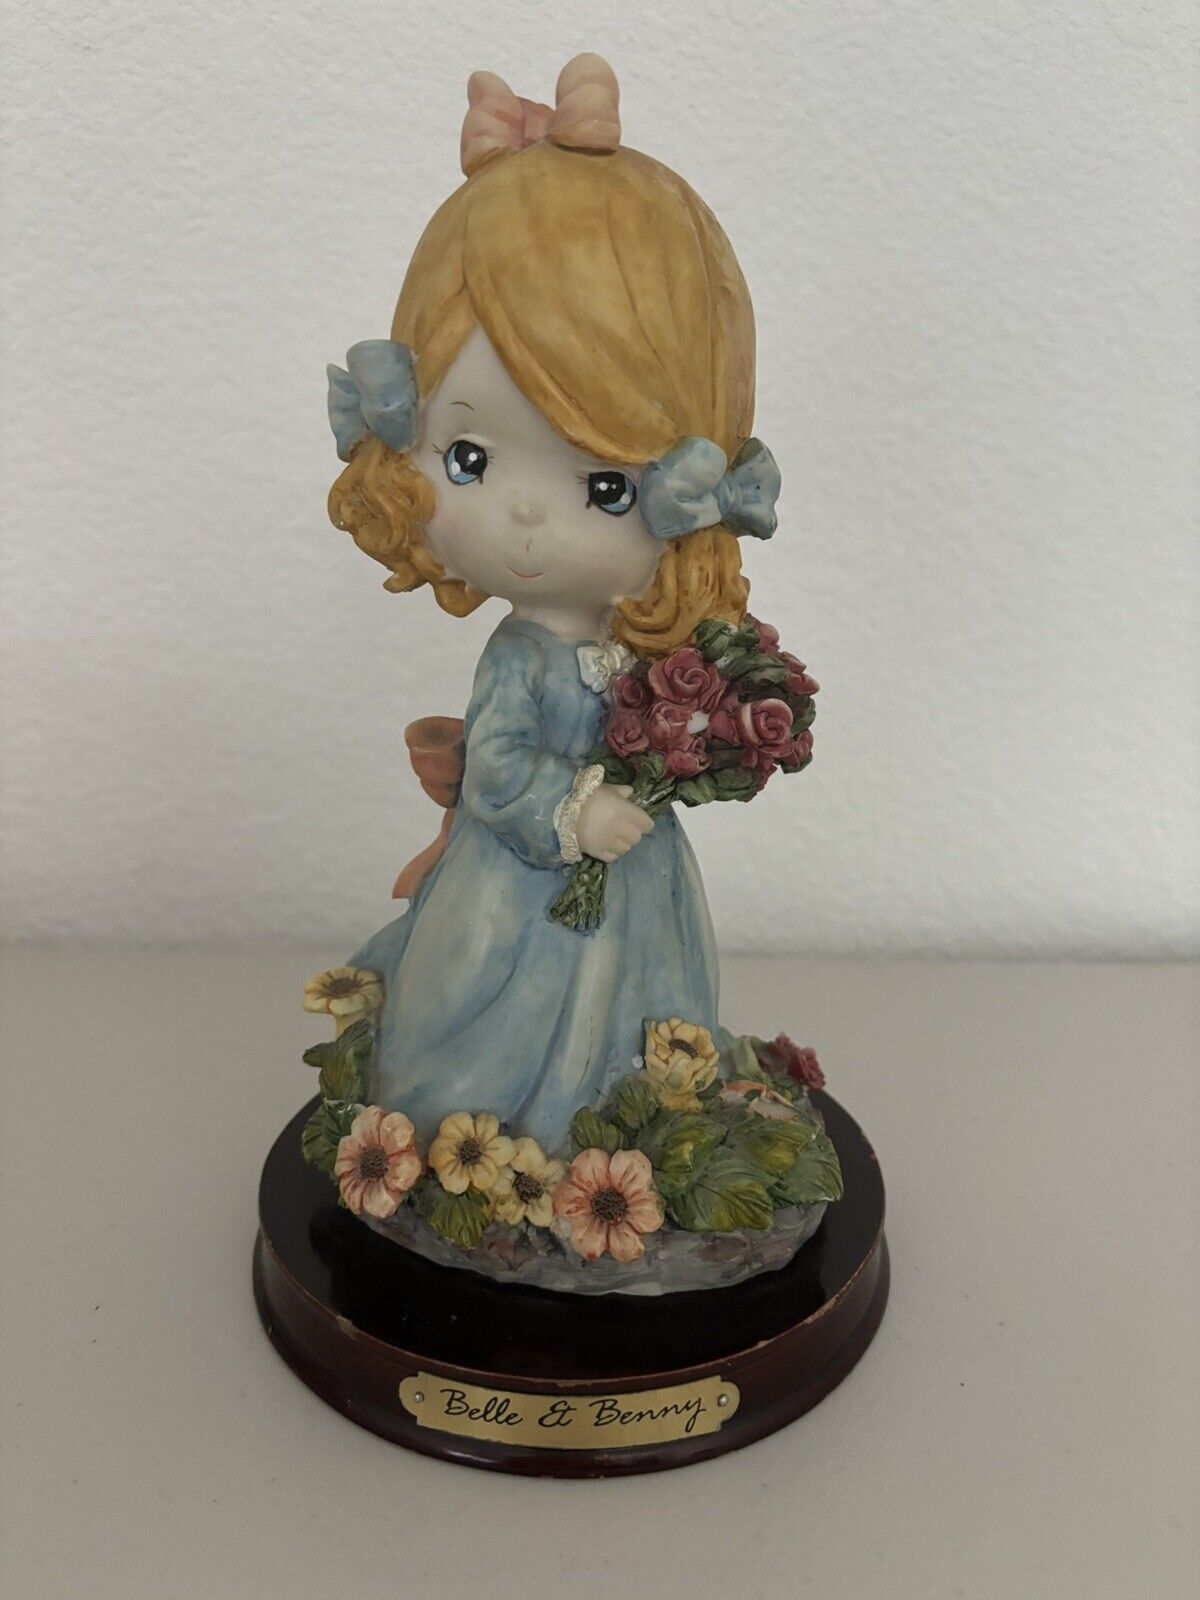 Precious Moments Belle & Benny Figurine Girl with blue dress and flowers